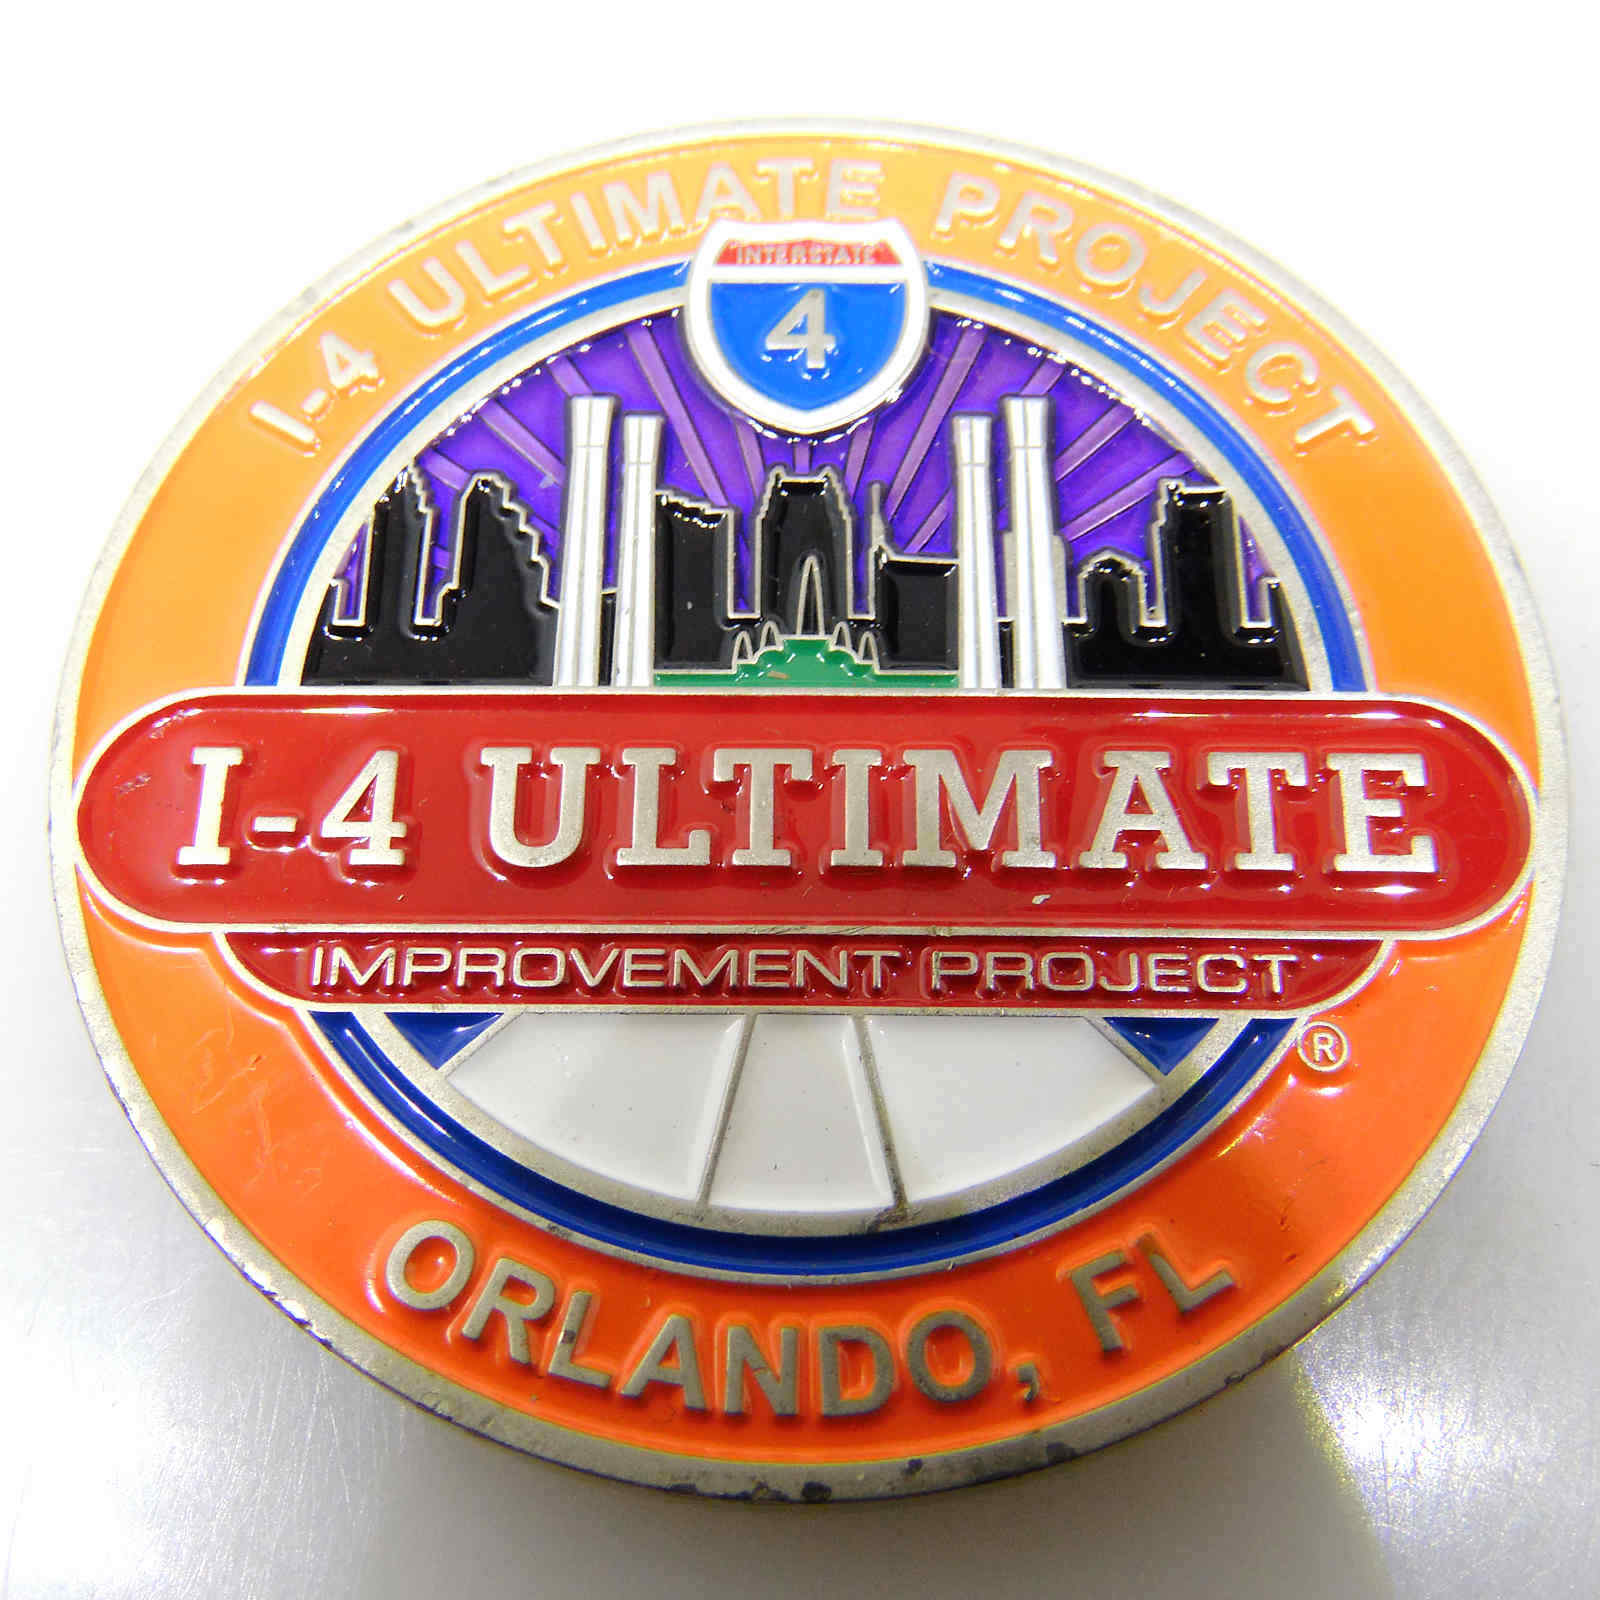 1-4 ULTIMATE PROJECT ORLANDO FL CHALLENGE COIN